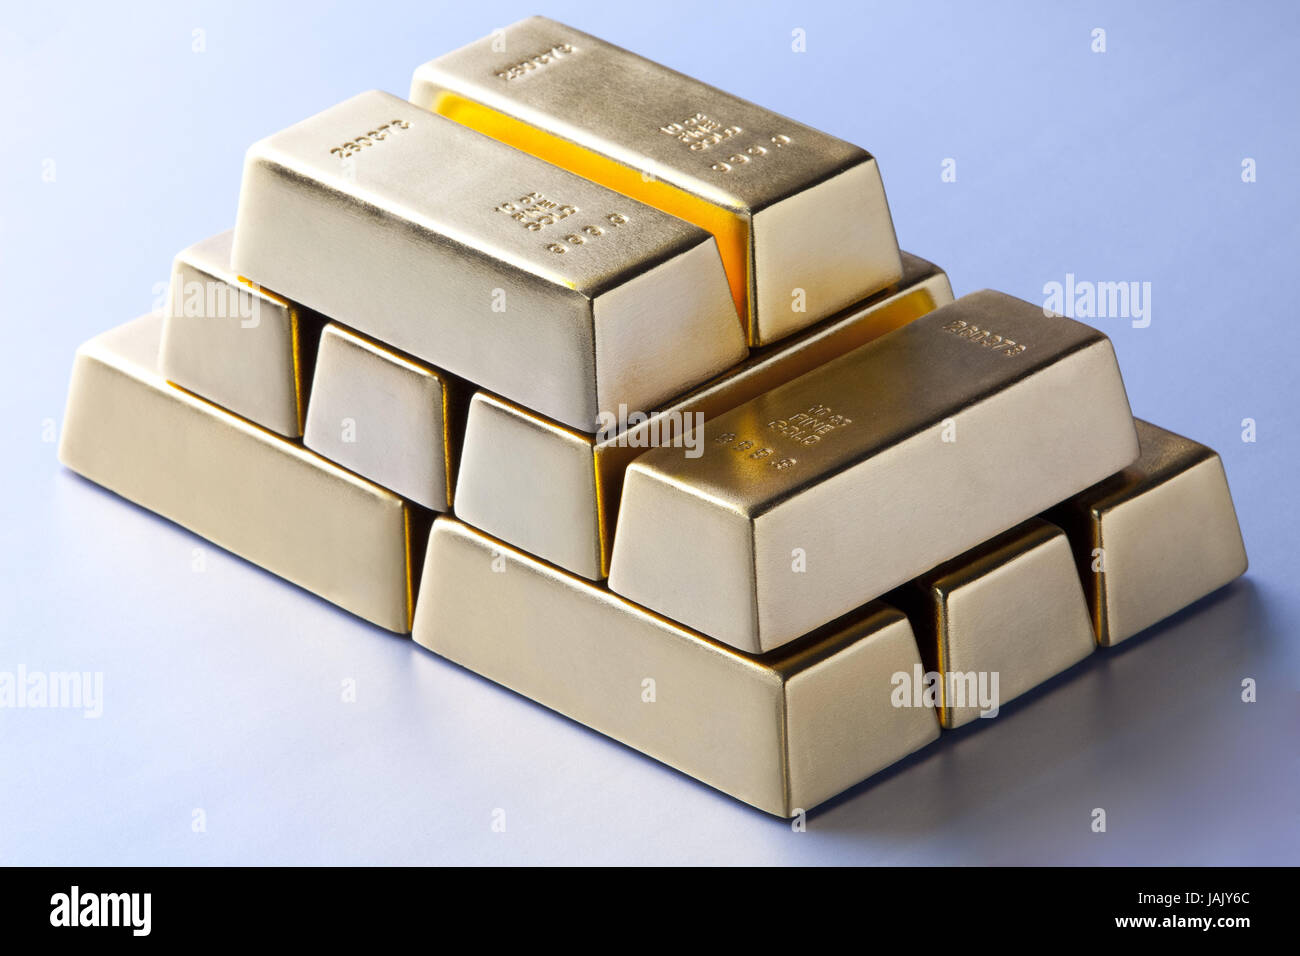 Gold bars,stacked,value,worth-stably,depreciation,fixed assets,security risk,brilliantly,gold,gold bar,fine gold,legal estate,wealthy,insurance,stamp,stamped,purely,purely,profit,loss,attachment,investment,value attachment,wealth,luxury, Stock Photo